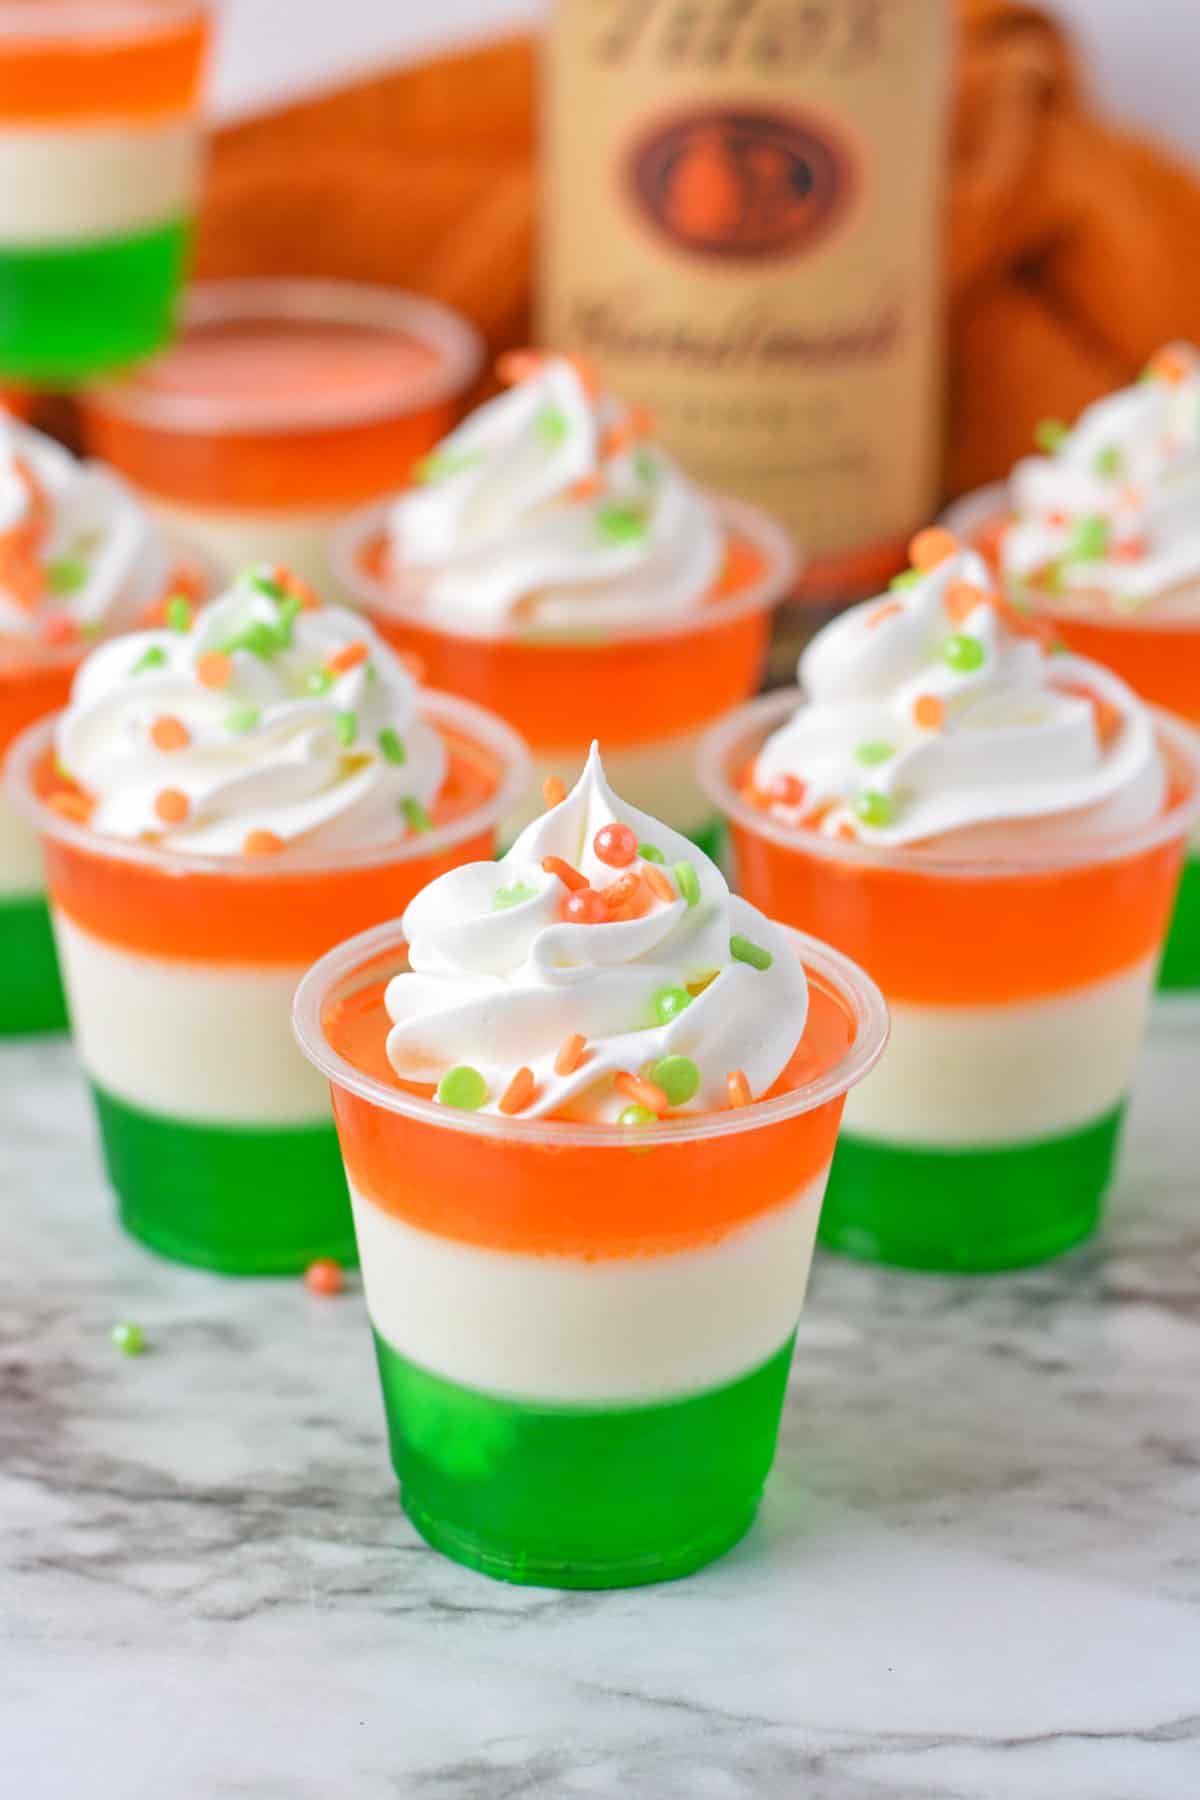 Green, white, and orange layered jello shots with whipped cream and sprinkles.